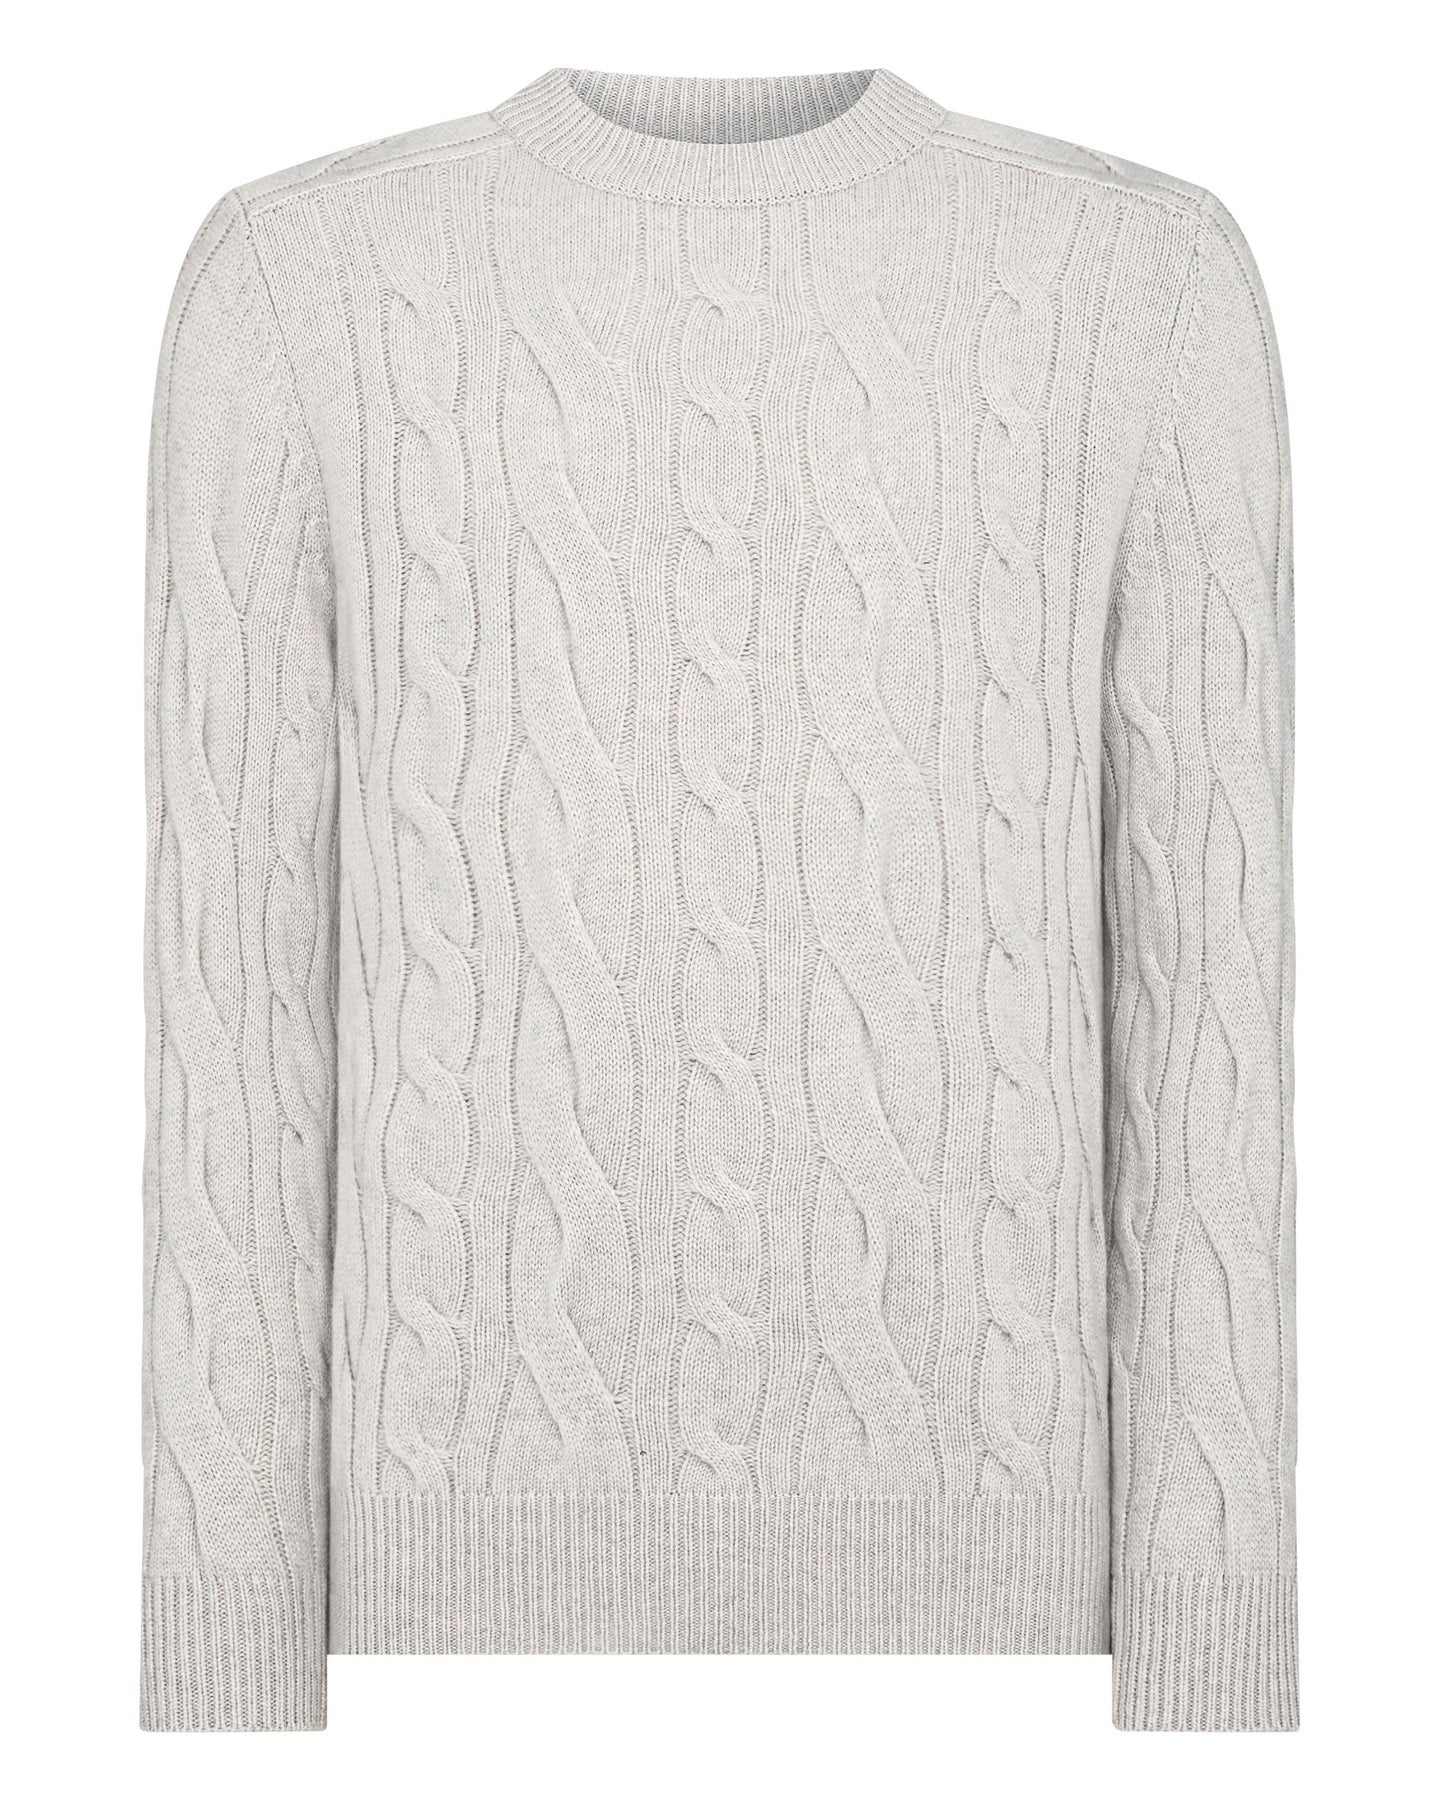 N.Peal Men's Mutli Cable Round Neck Cashmere Jumper Pebble Grey